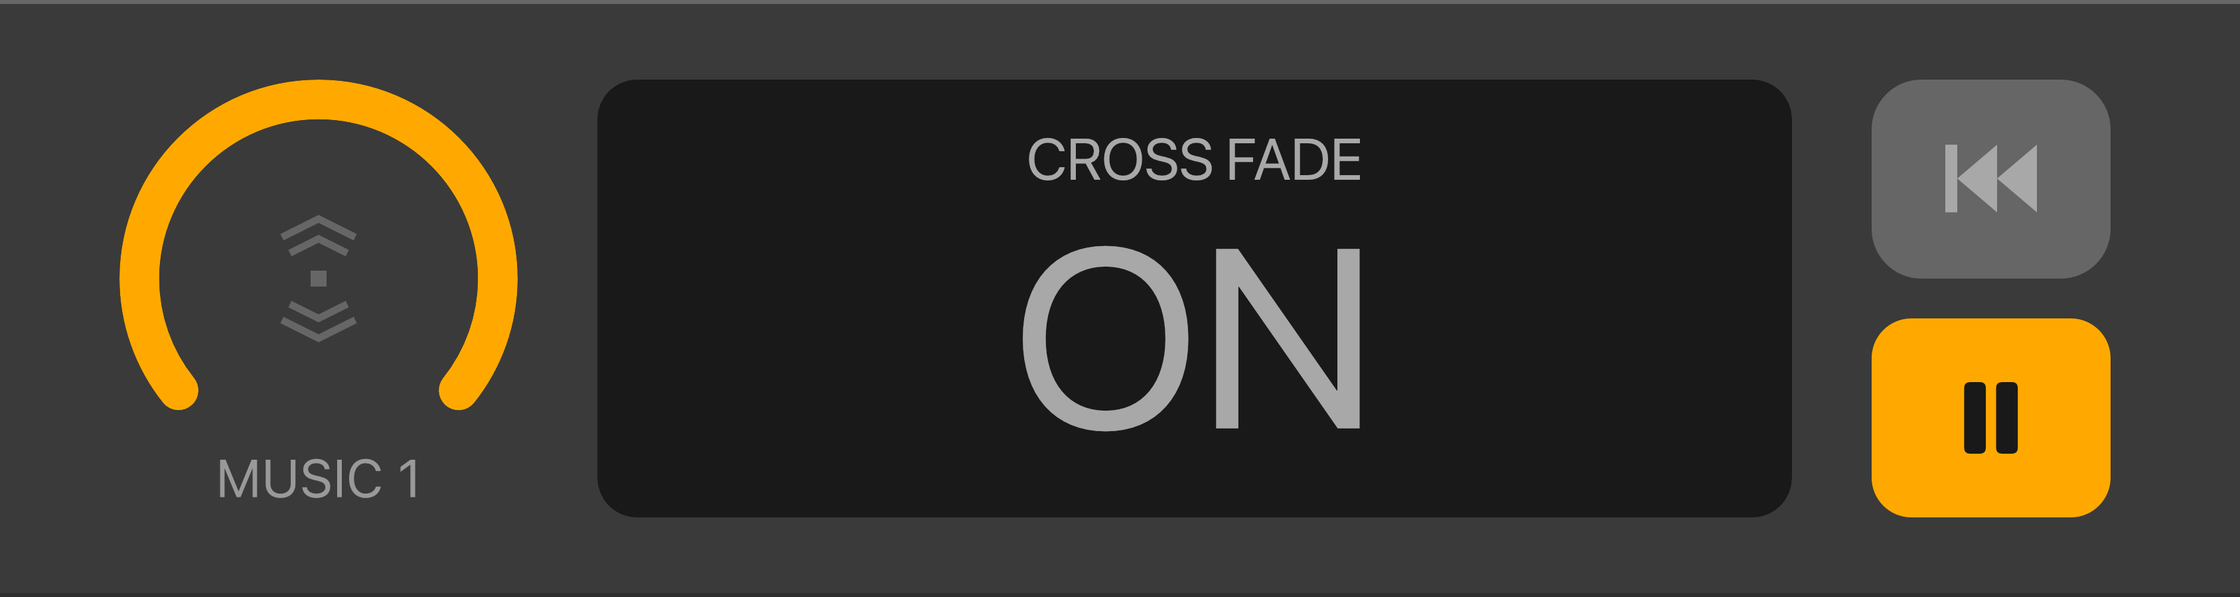 Cross_Fade_ON.png